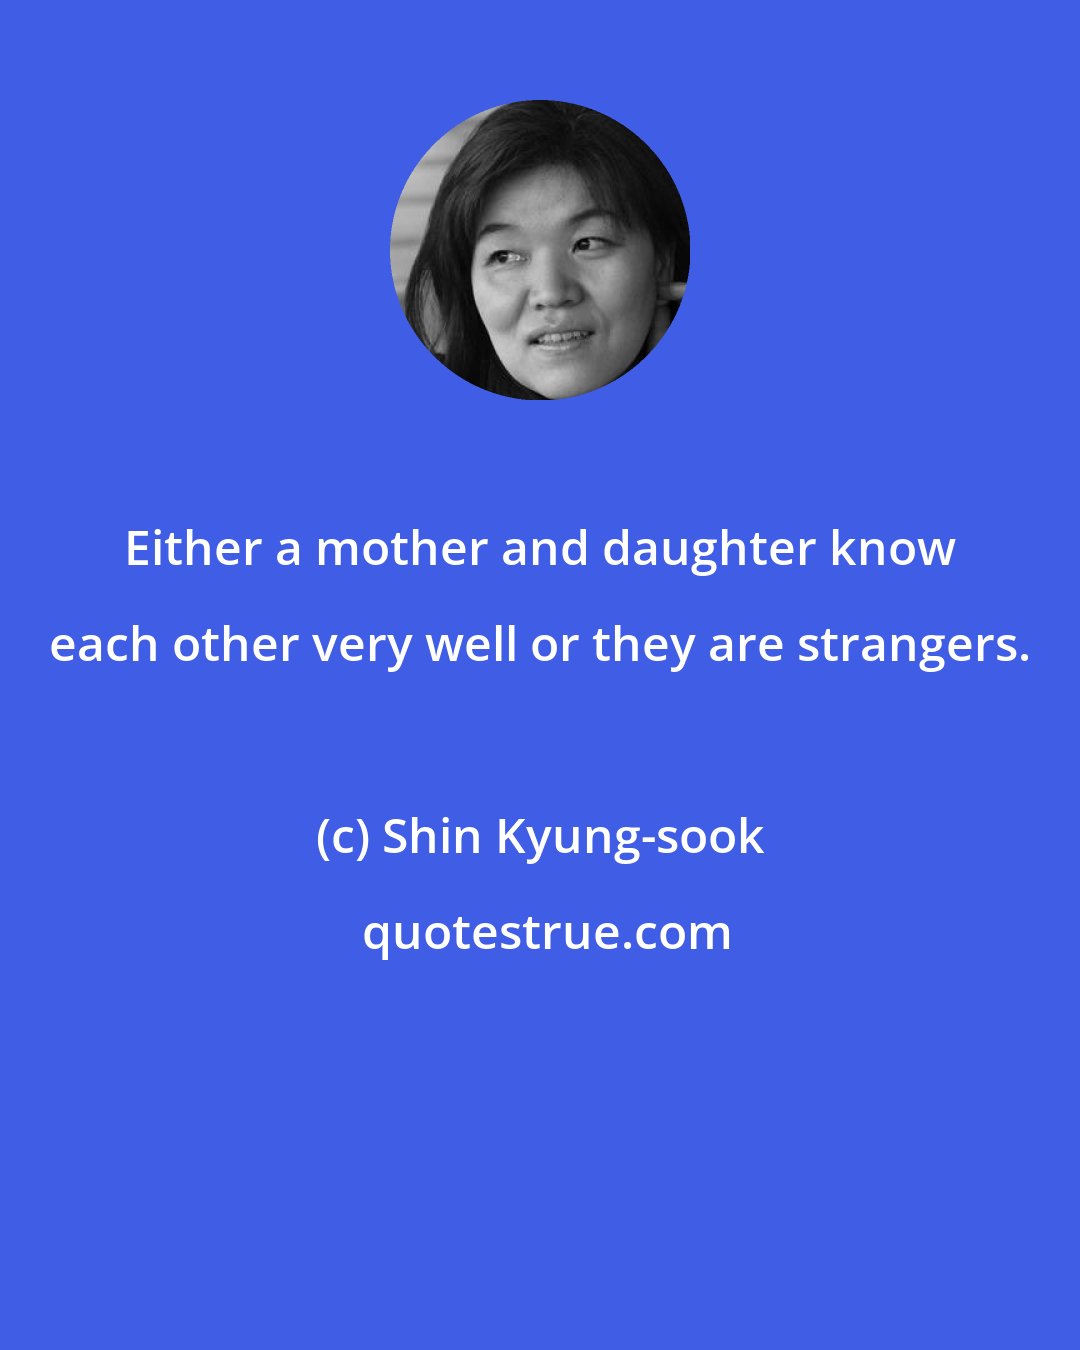 Shin Kyung-sook: Either a mother and daughter know each other very well or they are strangers.